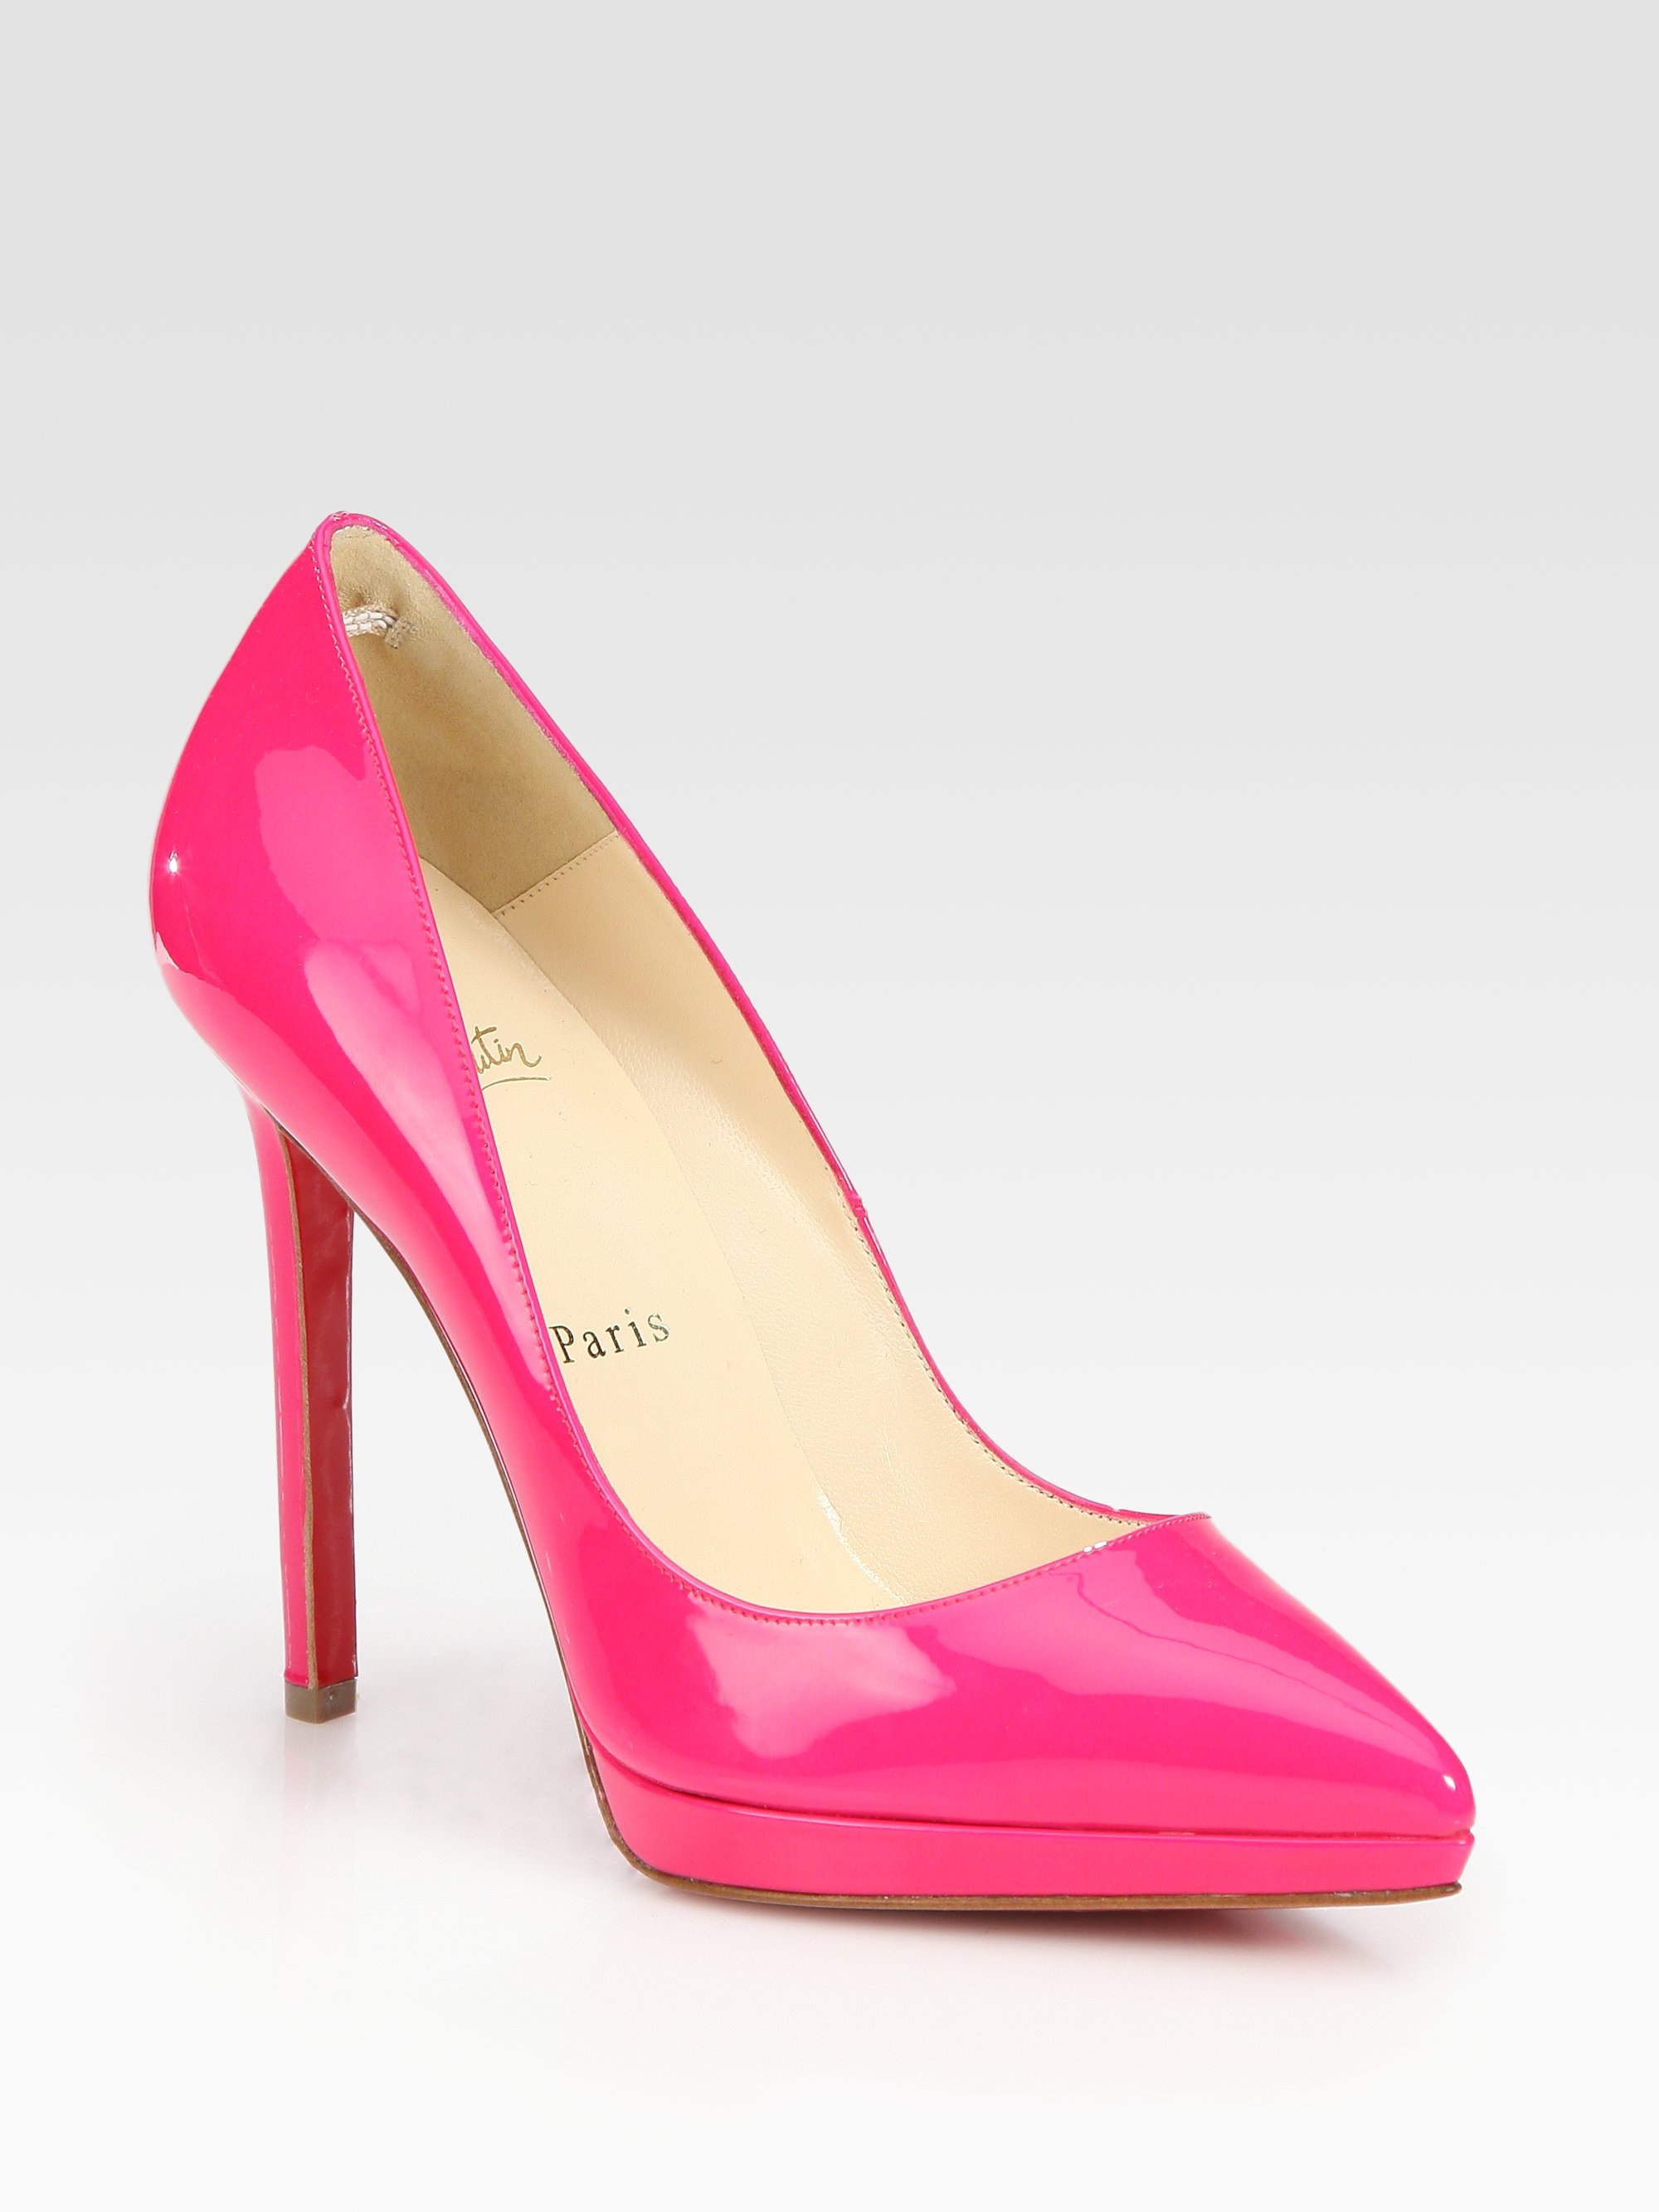 Lyst - Christian Louboutin Pigalle Plato Patent Leather Point Toe ...